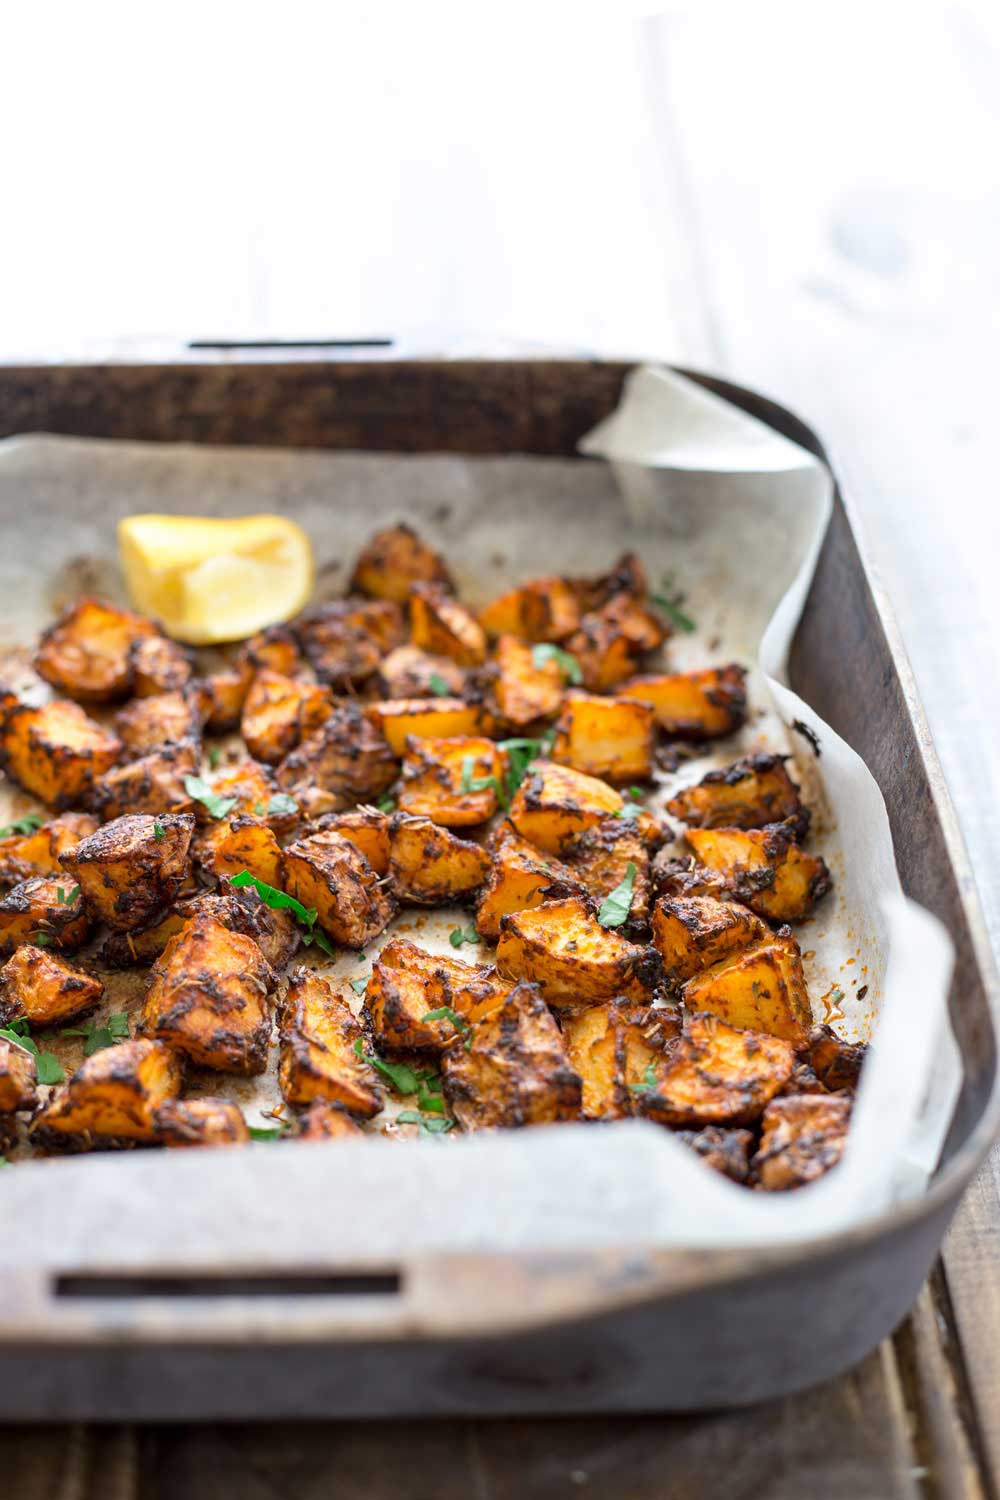 Crisp, smokey, with a touch of citrus, these Spanish potatoes are a great side dish or as an appetiser with drinks. As you spear your fork into the crisp shell you can just imagine sitting watching the sun set as you enjoy a cold beer in San Sebastián